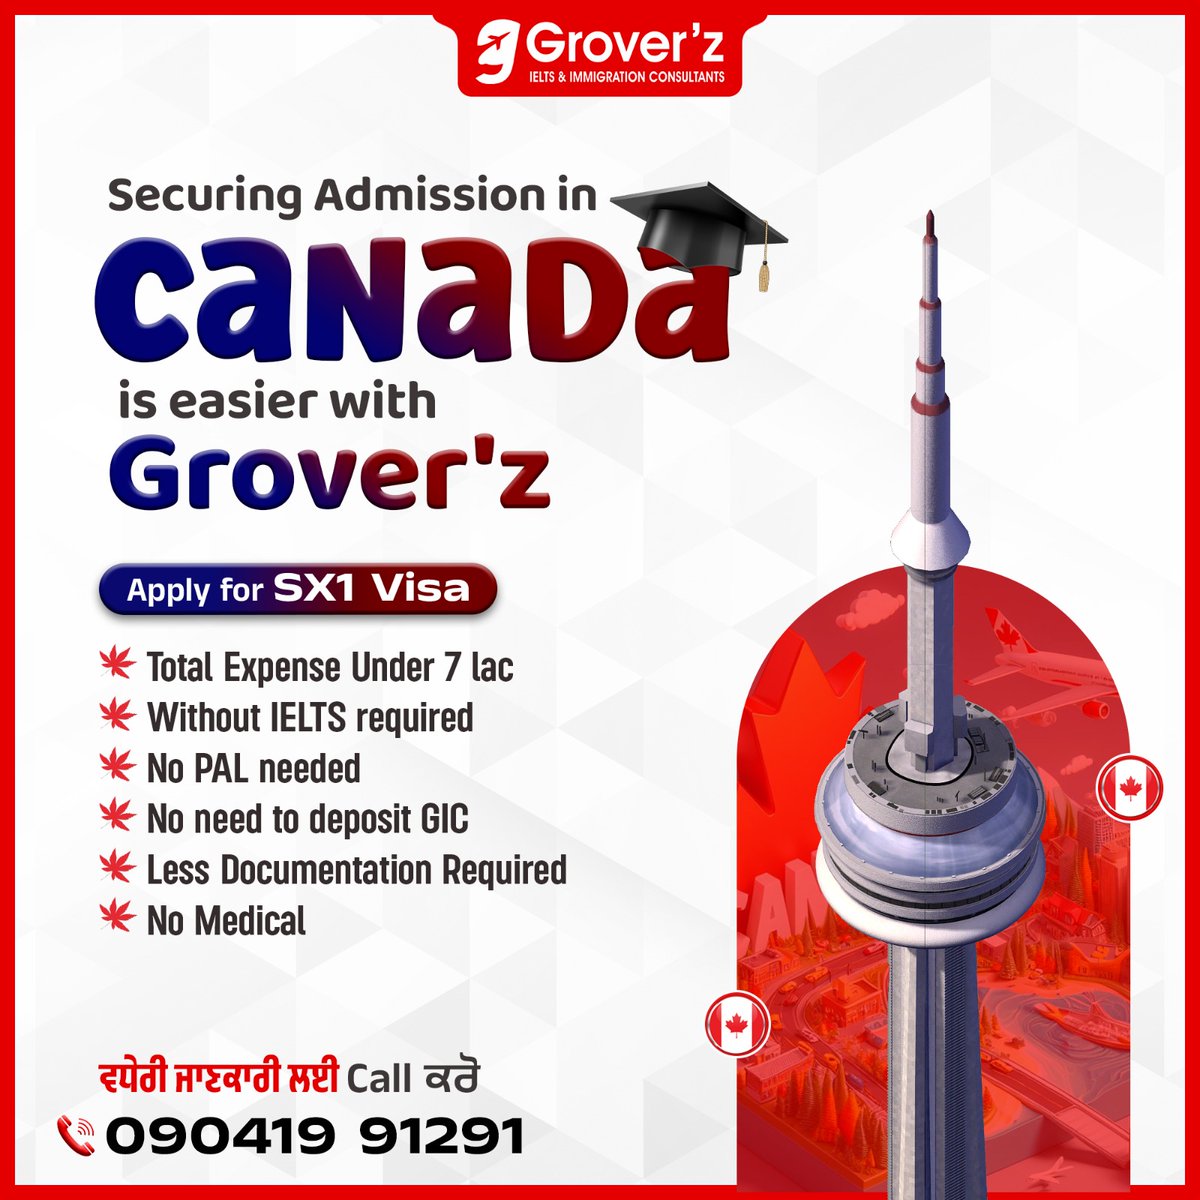 Apply for the SX1 Visa and enjoy a hassle-free process: ✅ No IELTS, PAL, or GIC deposit required ✅ Total expense under ₹7 Lakh ✅ Minimal documentation & no medical needed #GroverzIeltsImmigration #Canada #SX1Visa #Studyincanada #settleincanada #CanadaImmigration